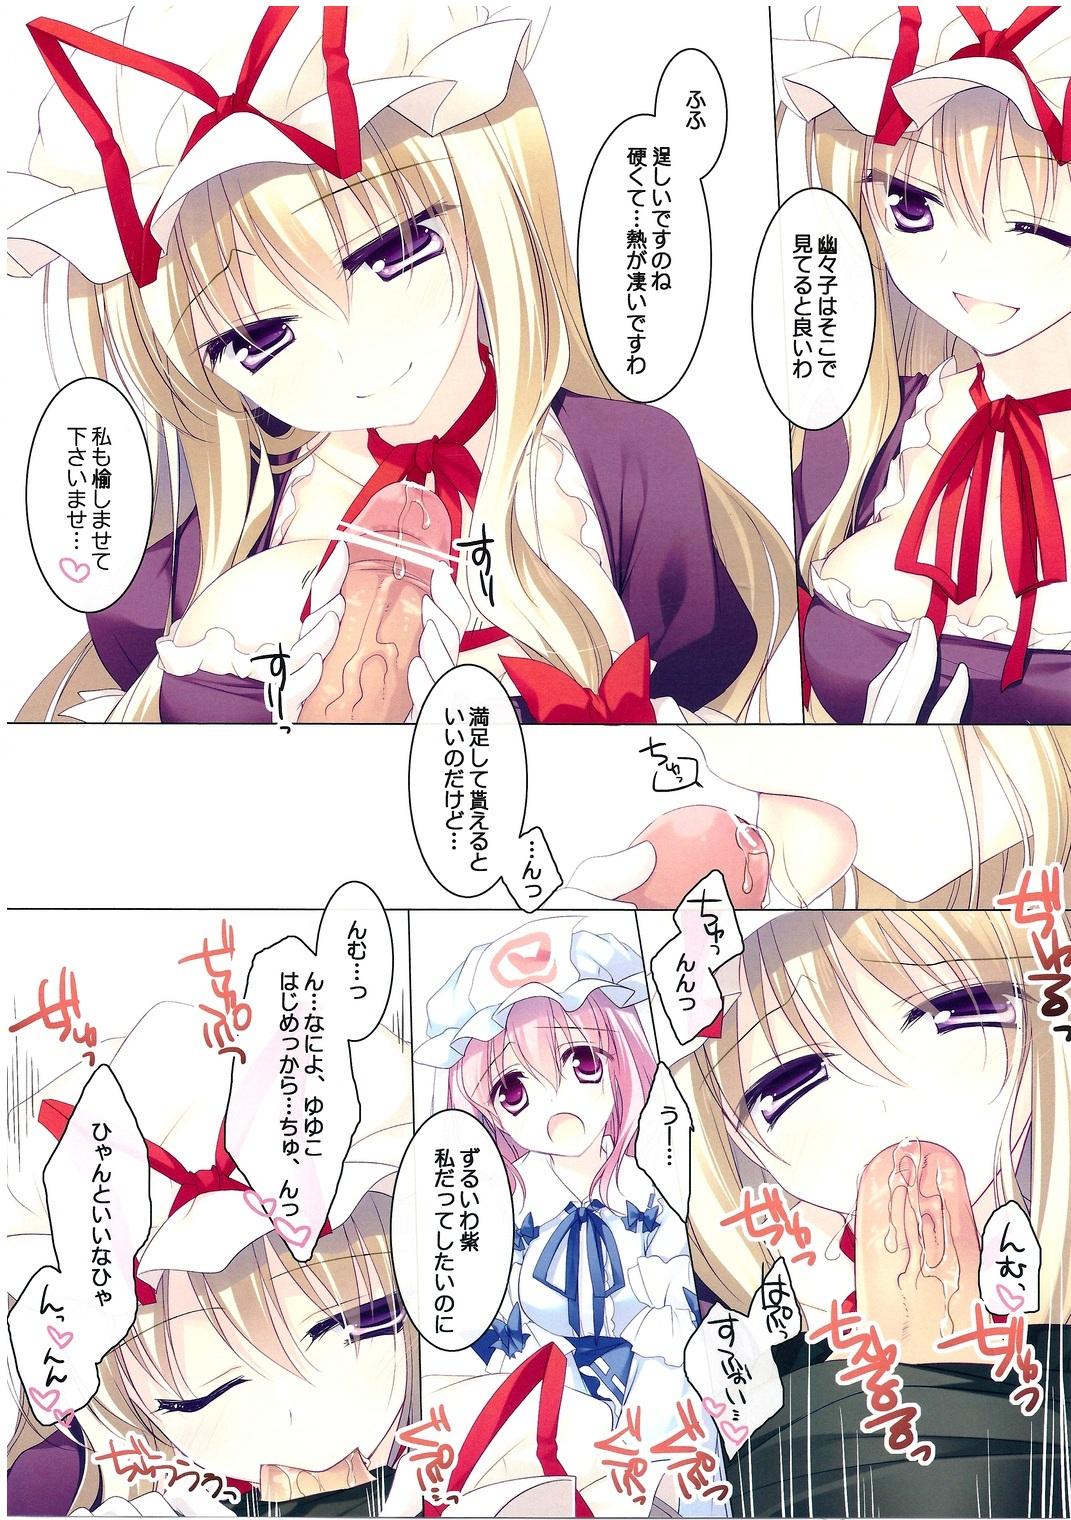 Best Blowjob Ever MERRY MERRY PH - Touhou project Amazing - Page 5